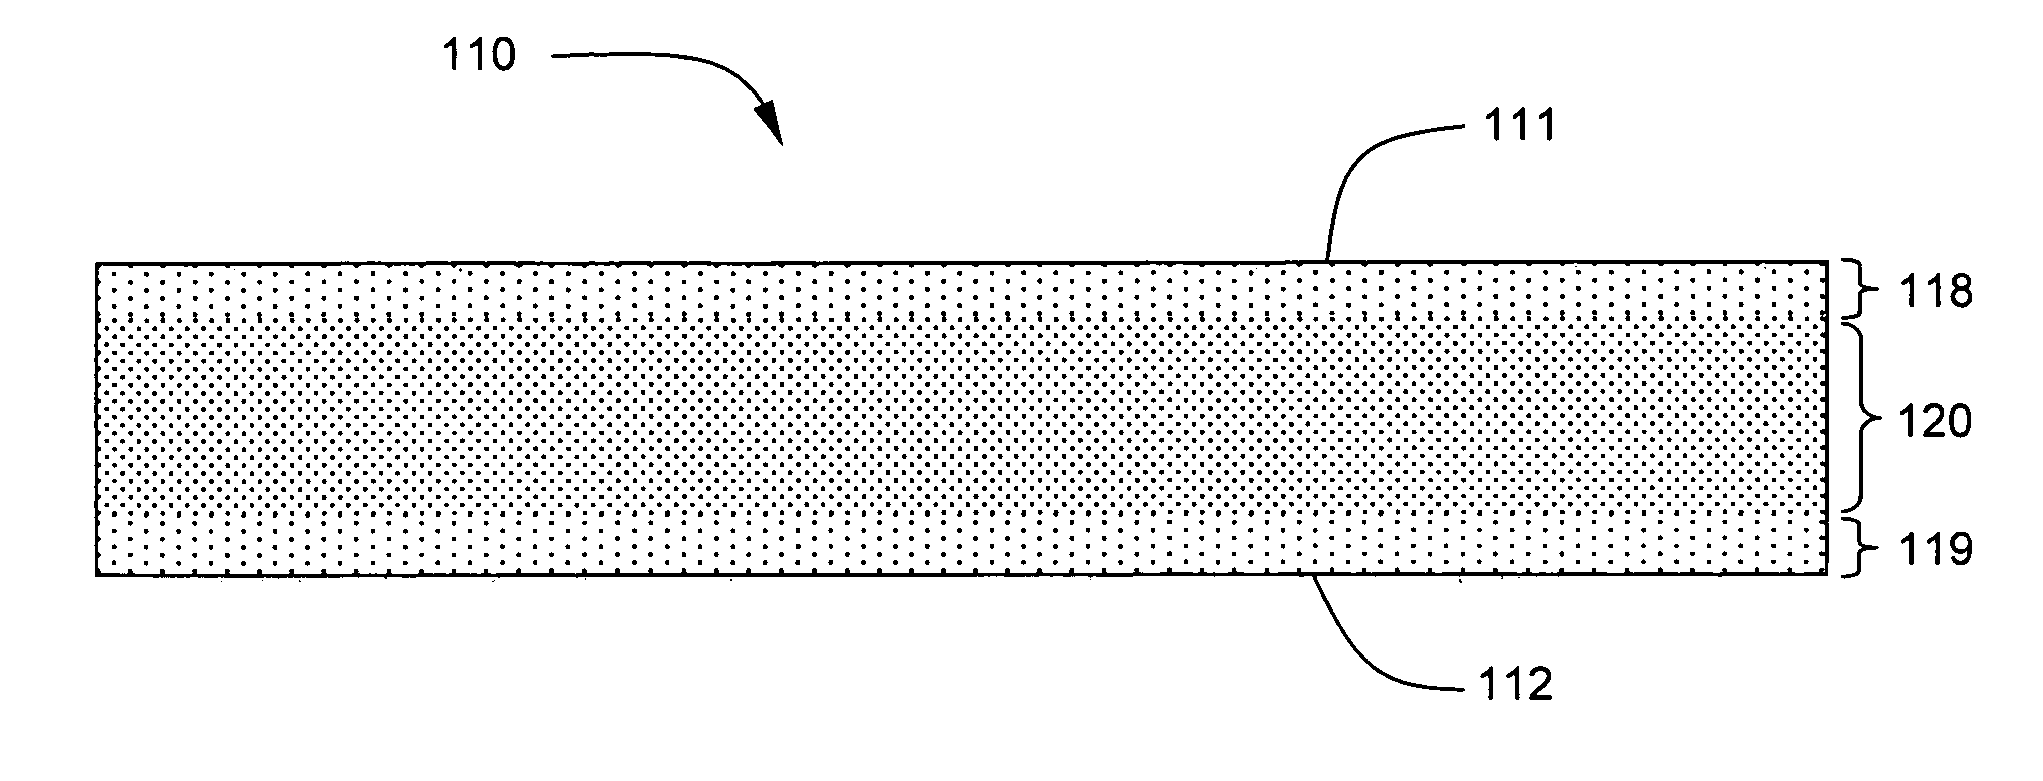 Composite wood replacement article and method of making same